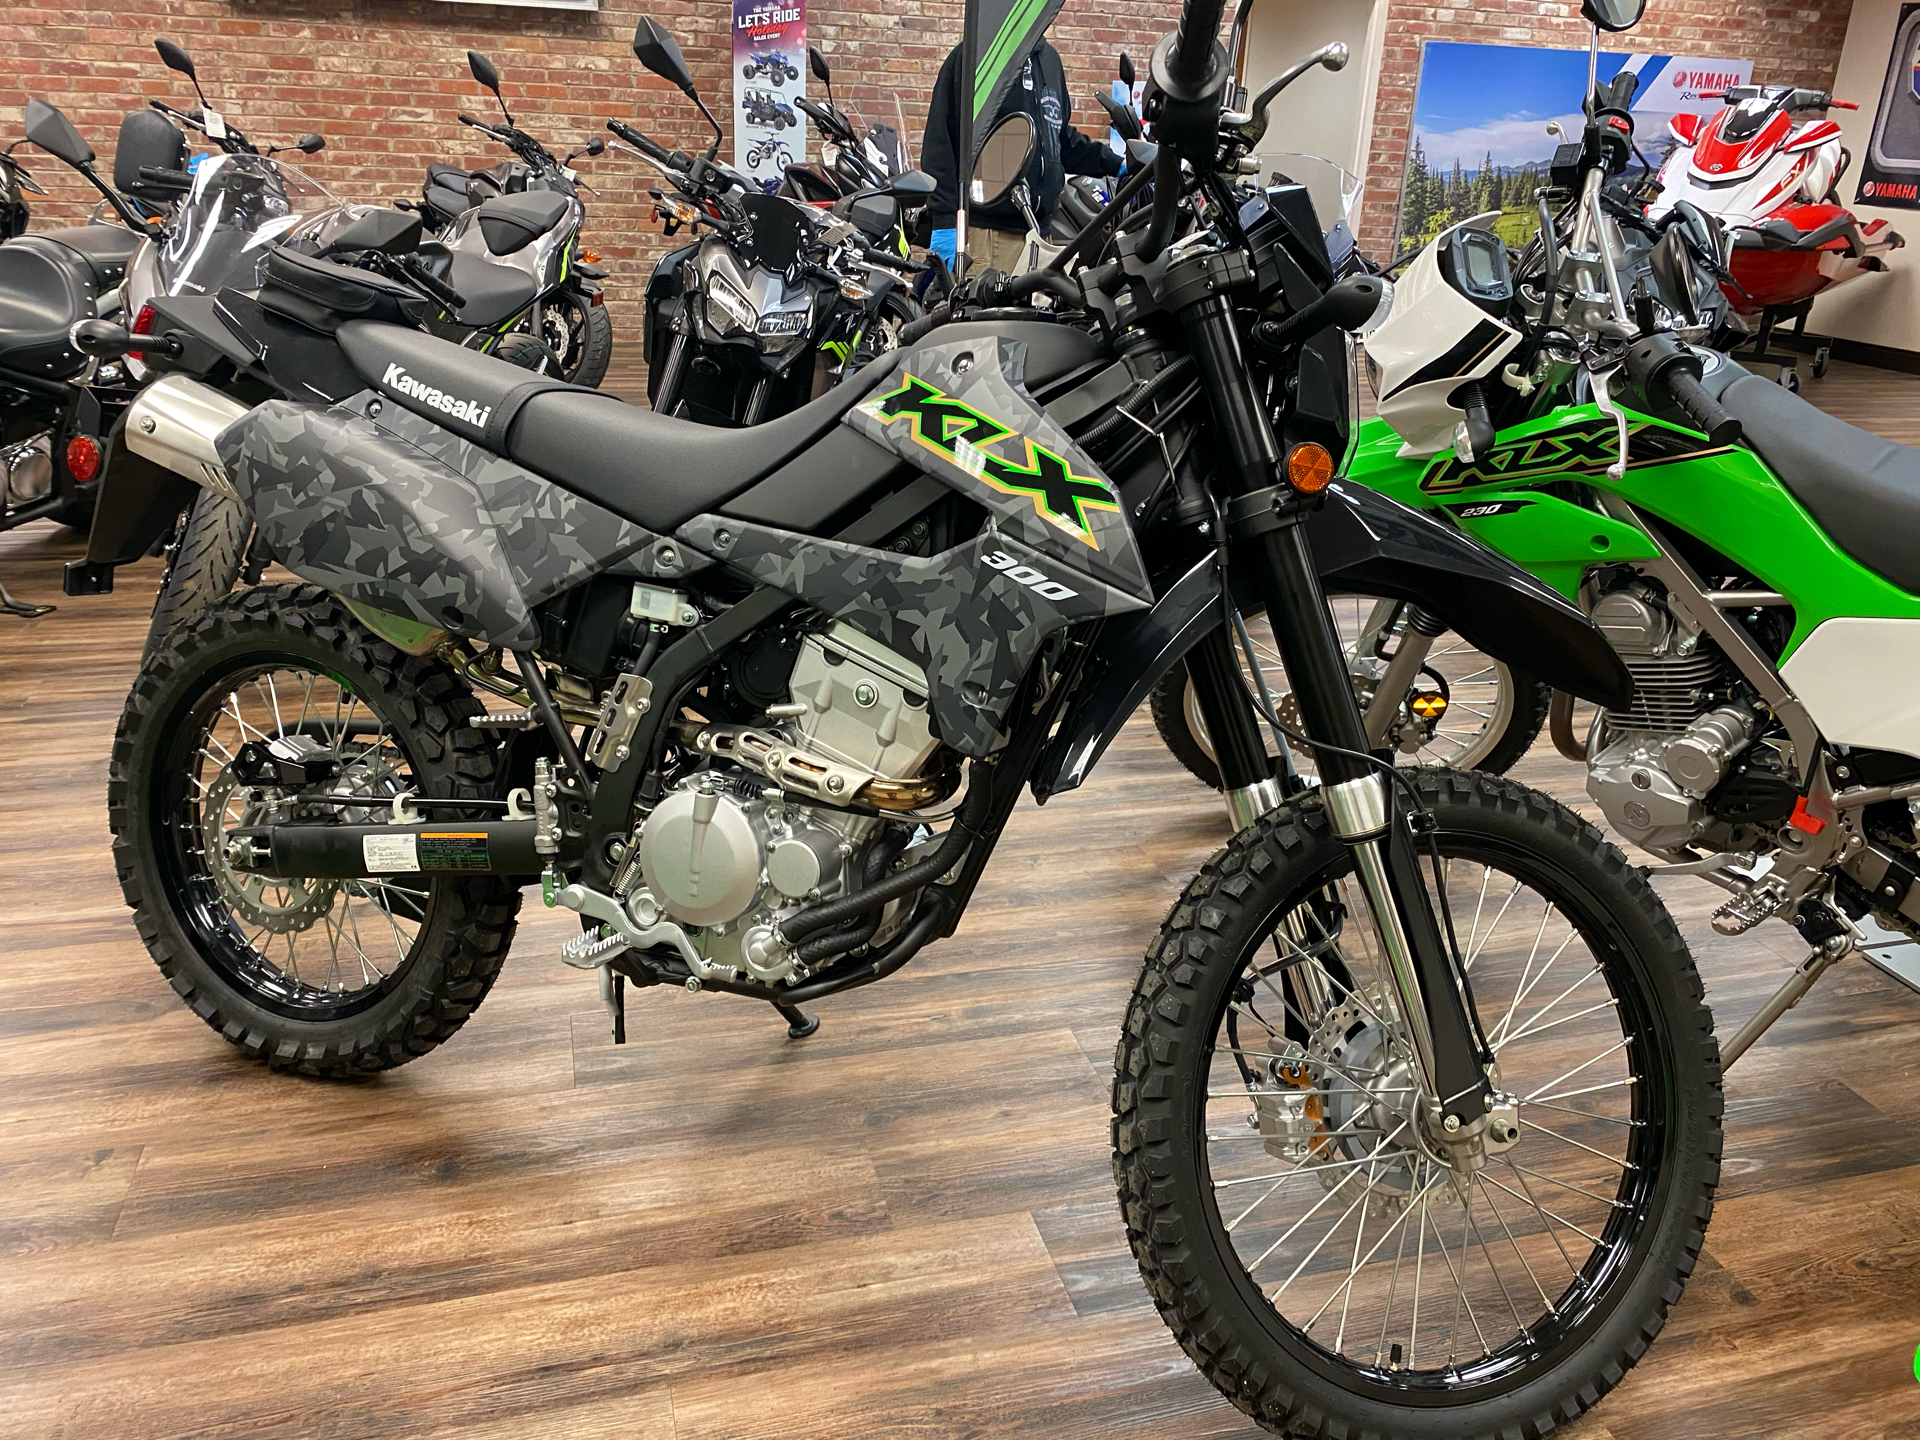 New 2021 Kawasaki KLX in Statesville, NC | Stock Number: A05201 - greatwesternmotorcycles.com